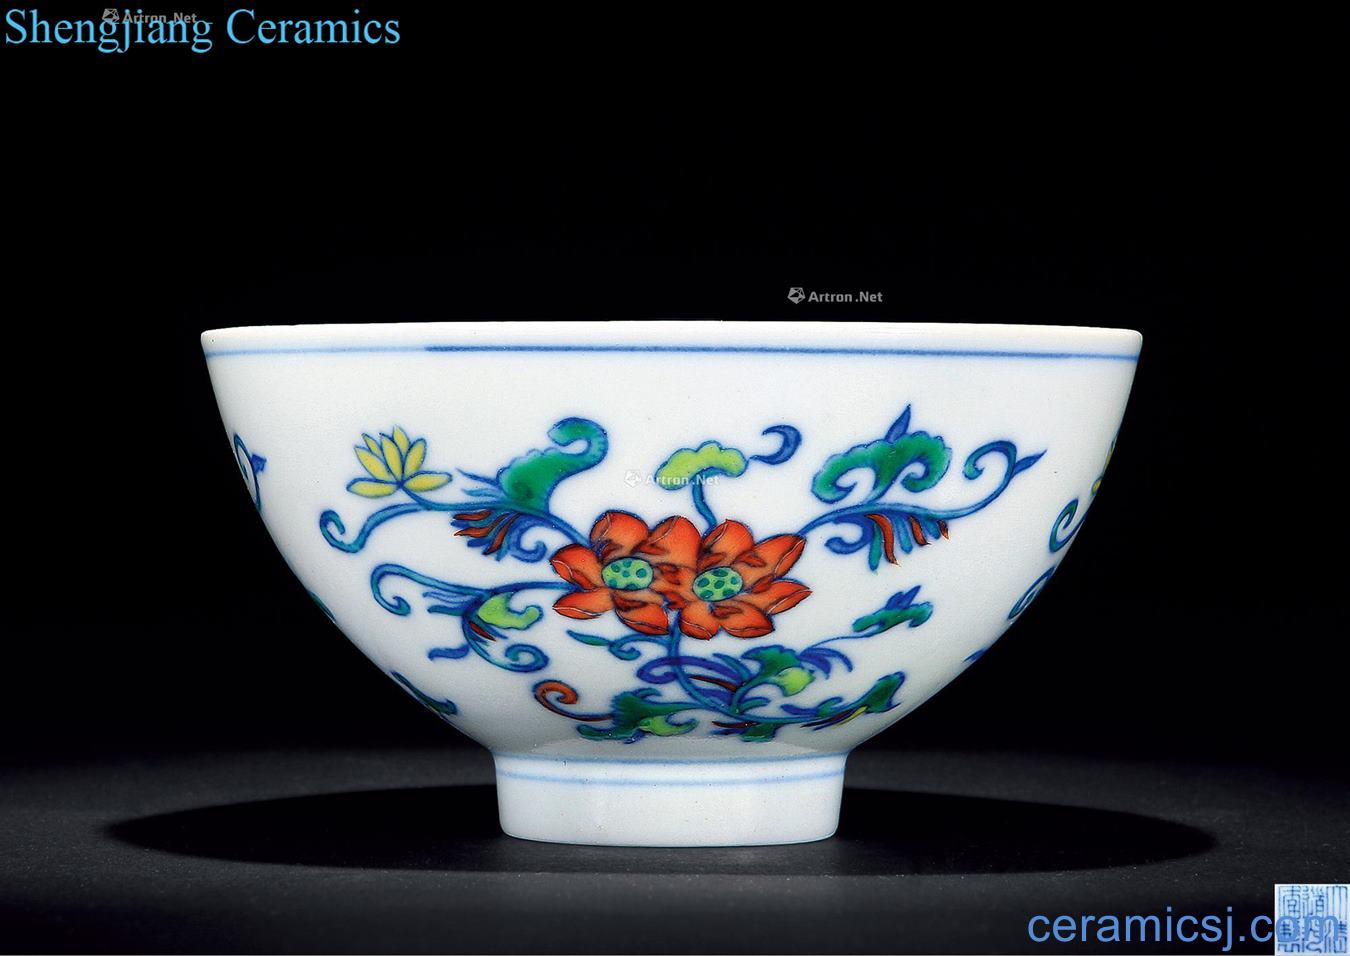 Qing daoguang bucket color flower tattoo heart bowls